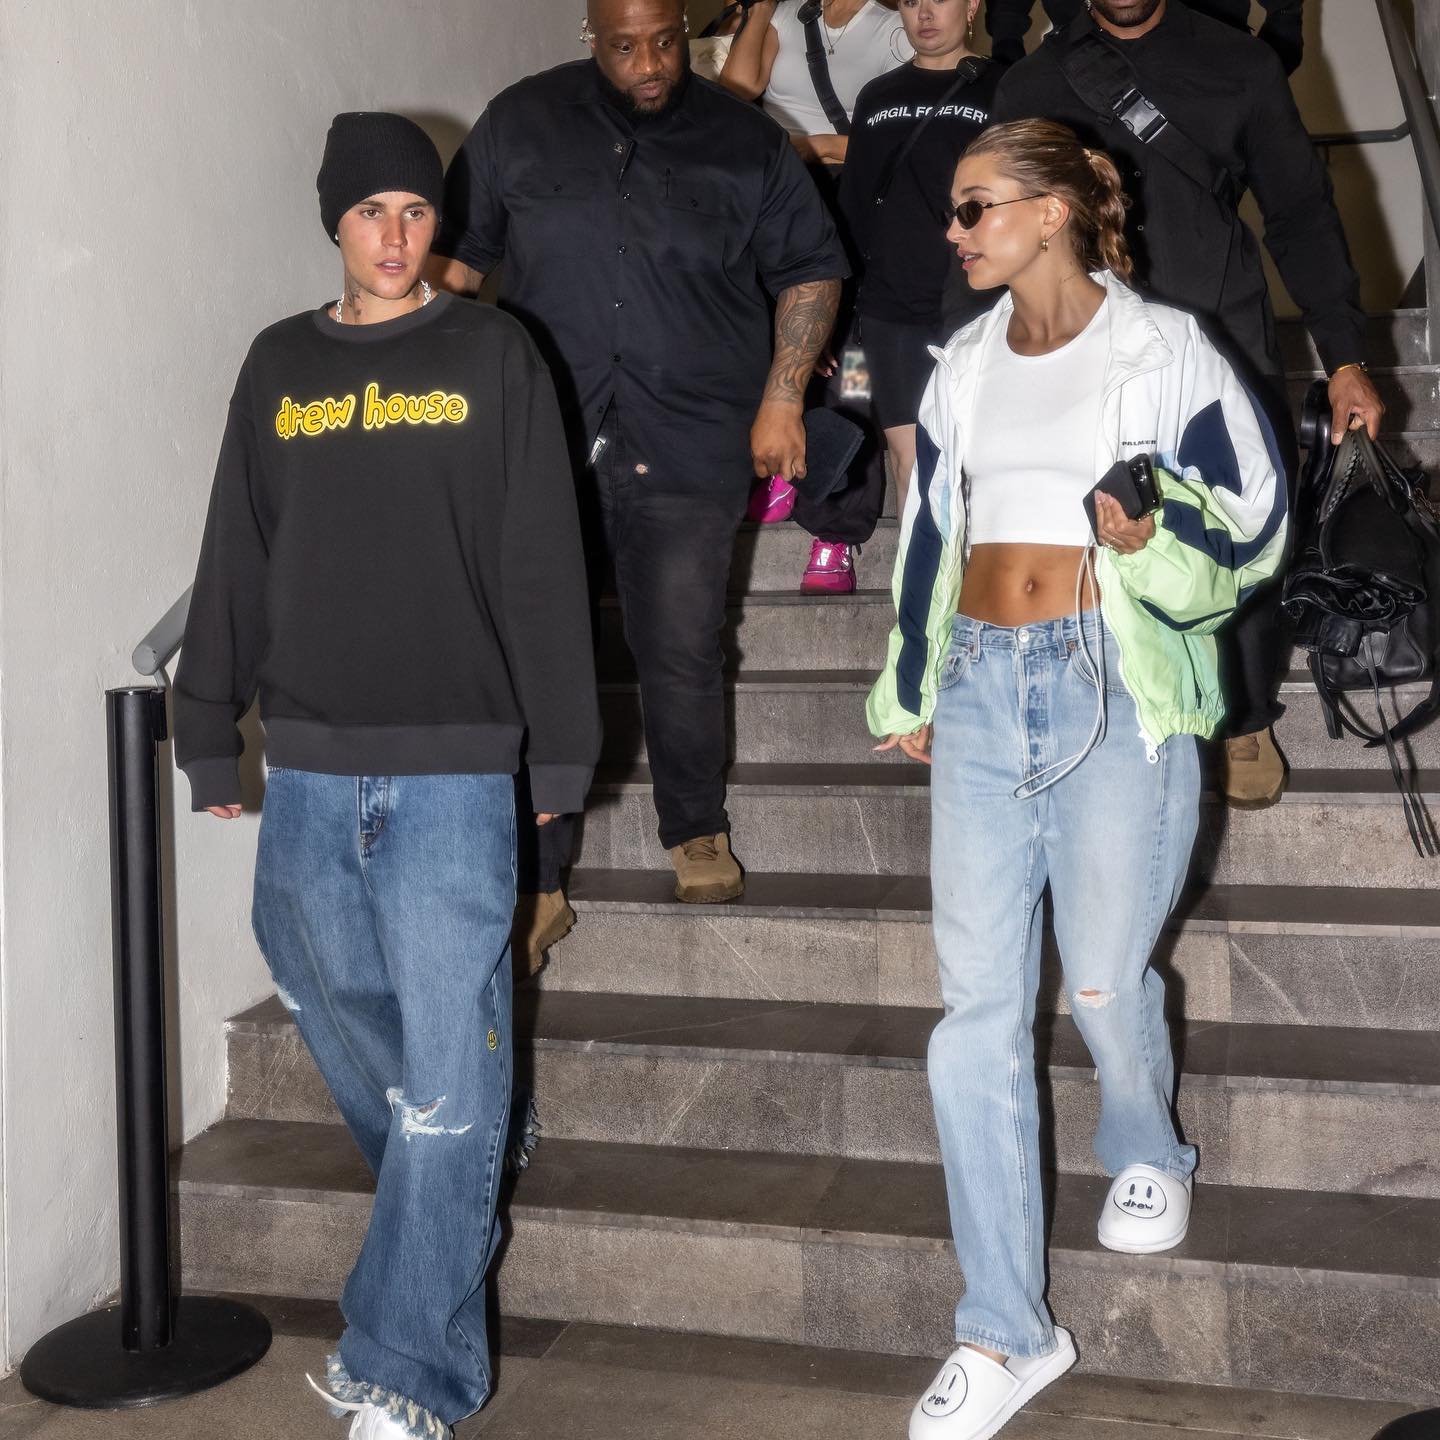 SPOTTED: The Biebs Steps out in Drew House, Louis Vuitton